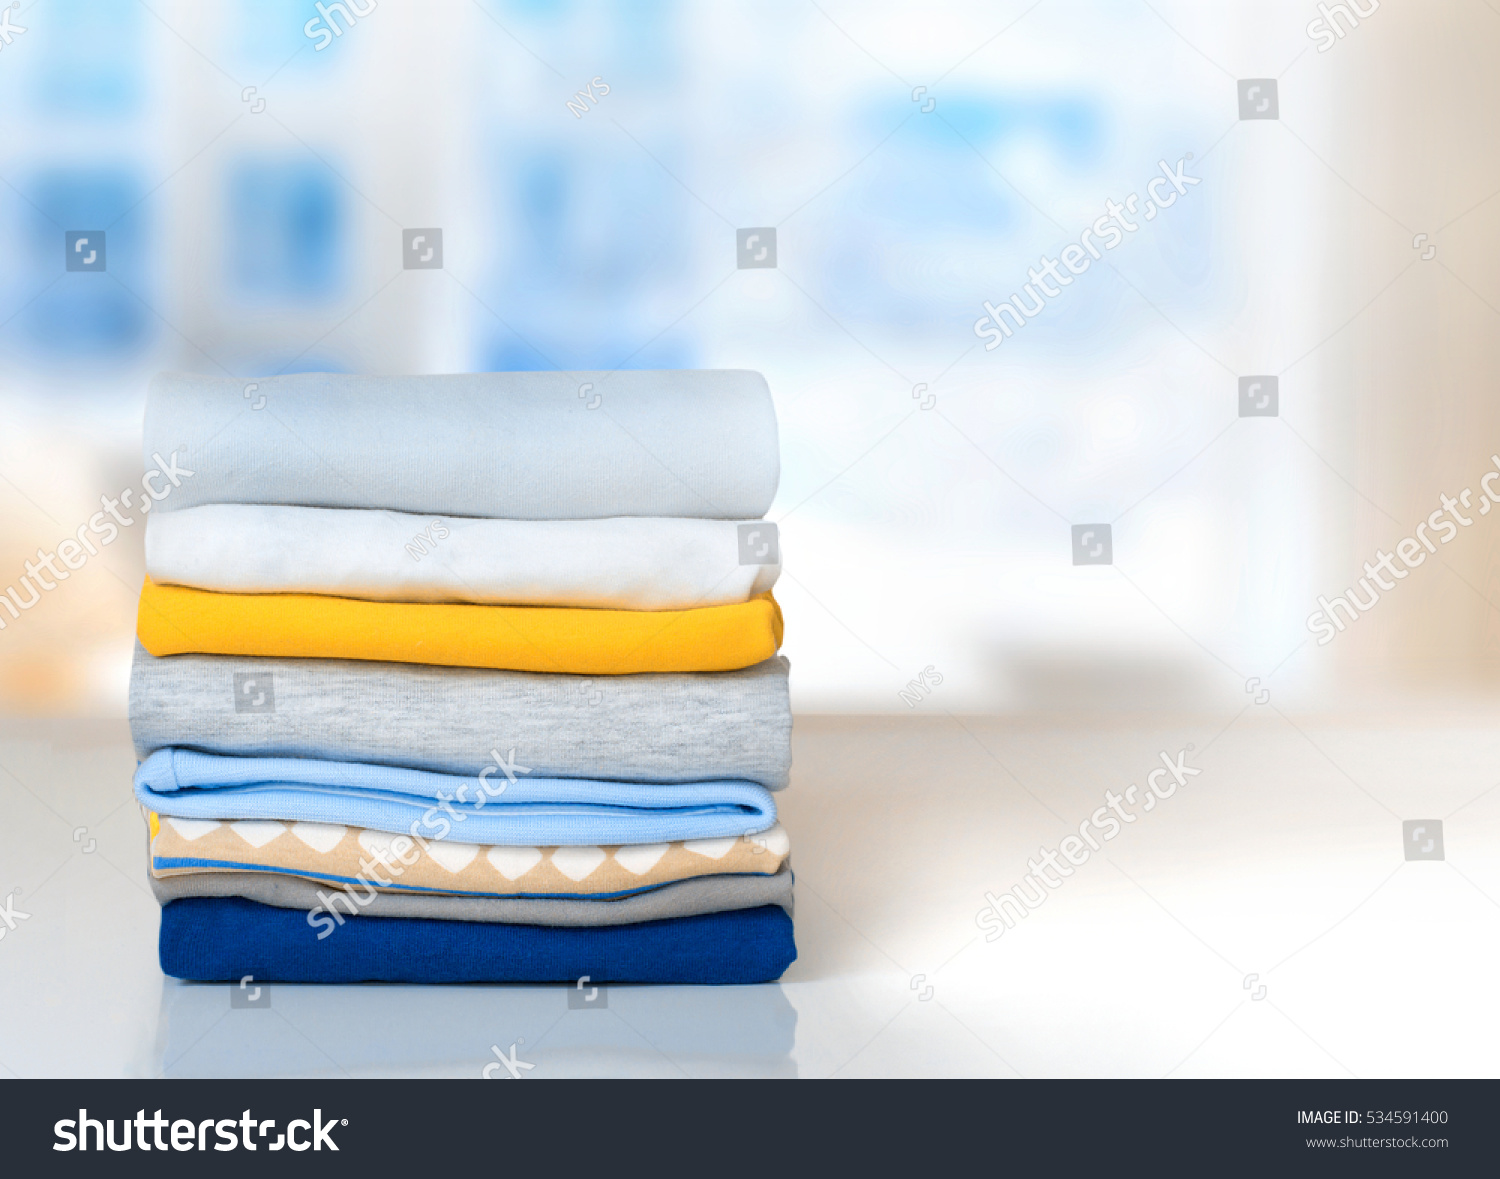 Cotton stack of colorful folded clothes on white table indoors empty space background.Household concept.Clean laundry pile. #534591400